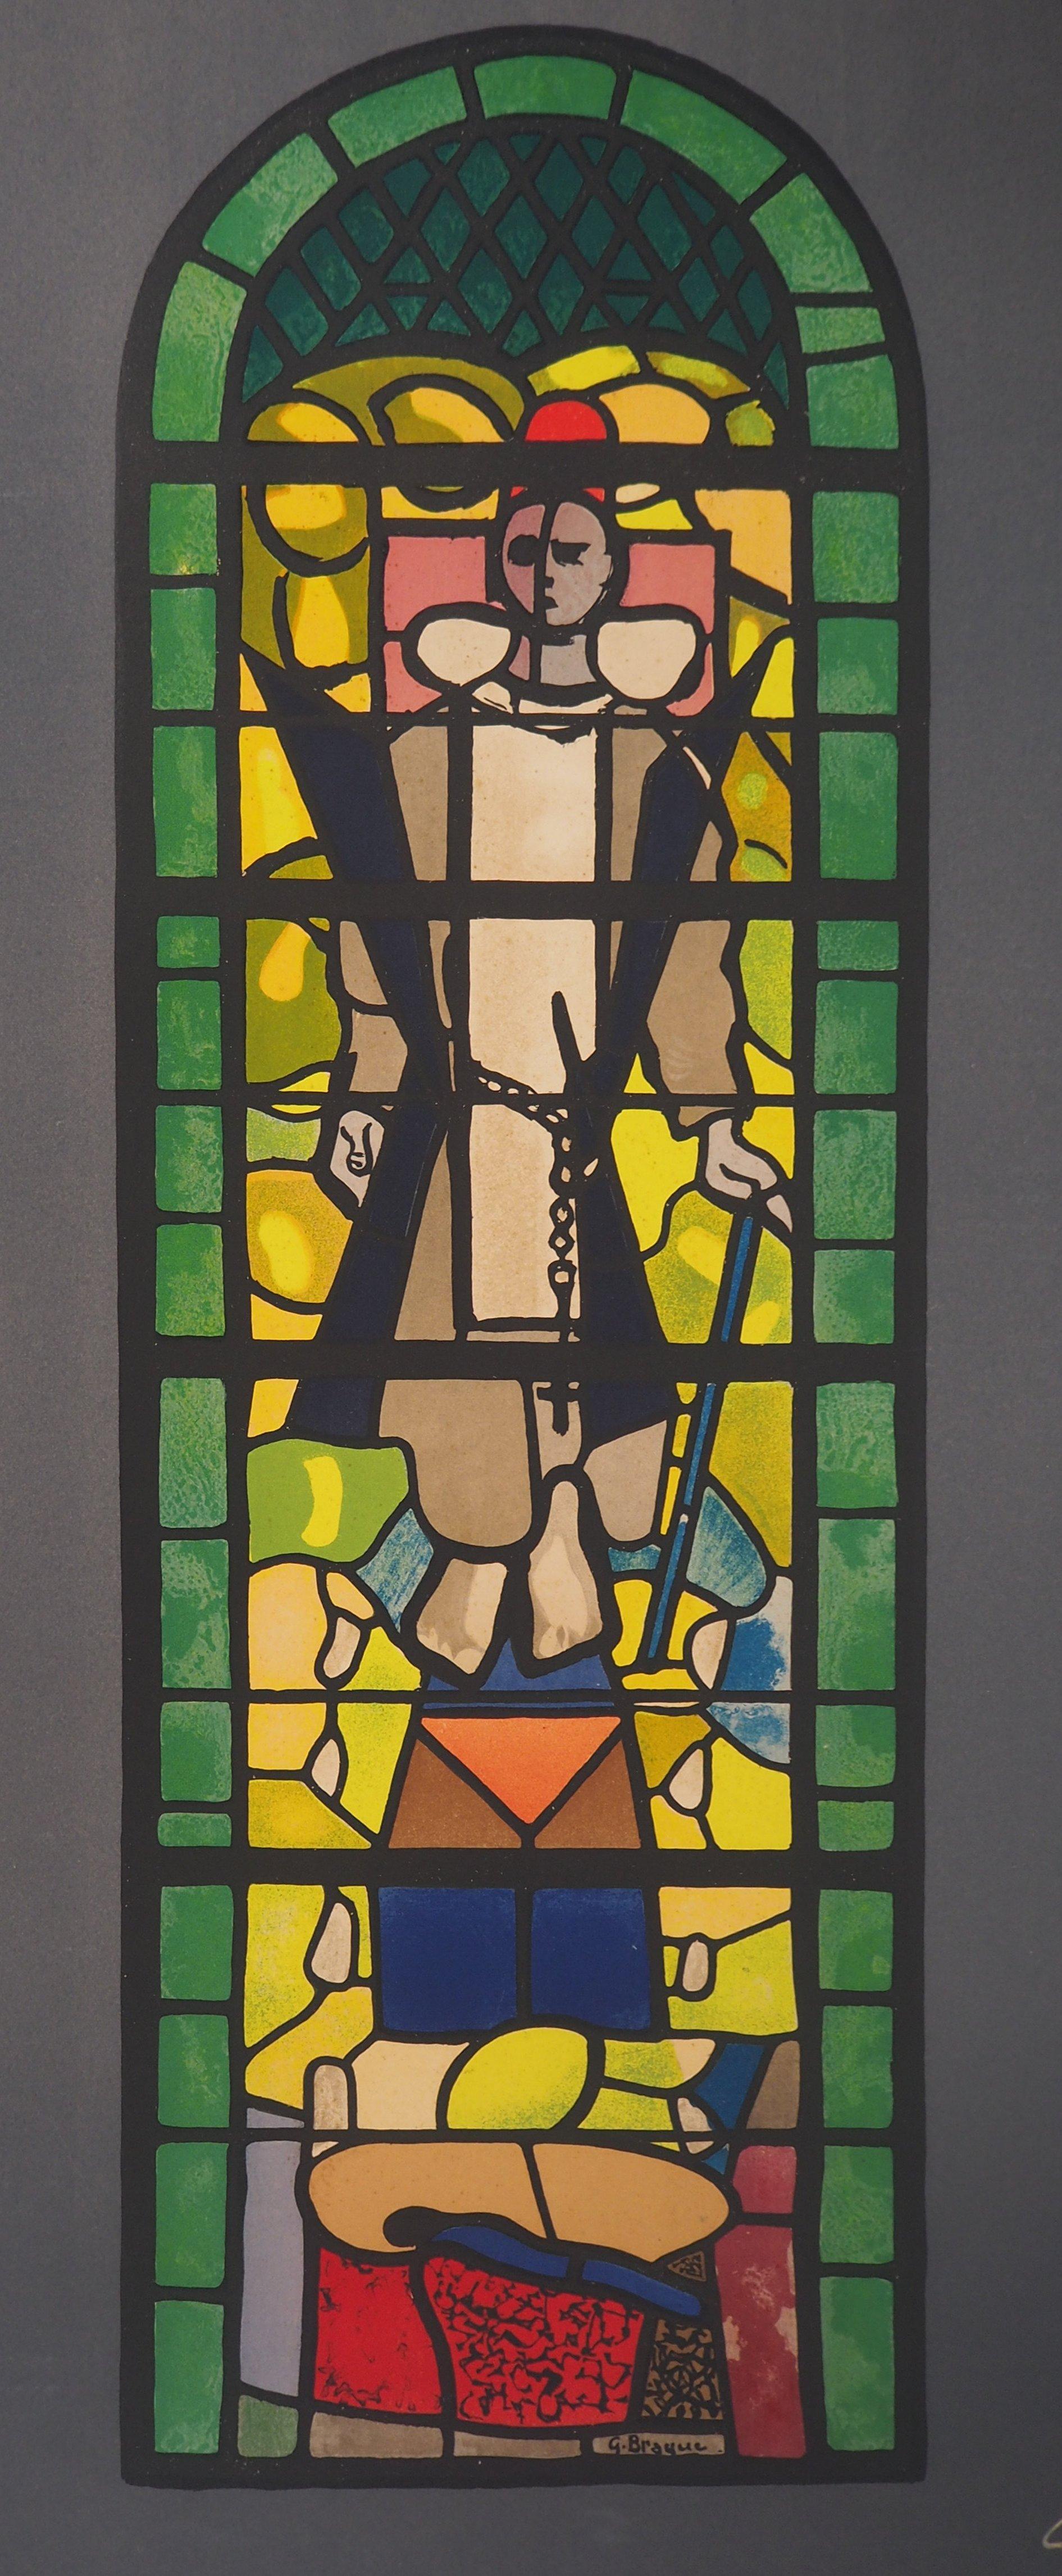 Saint Dominic - Original lithograph, Handsigned / 175 (Orozco #791) - Print by Georges Braque